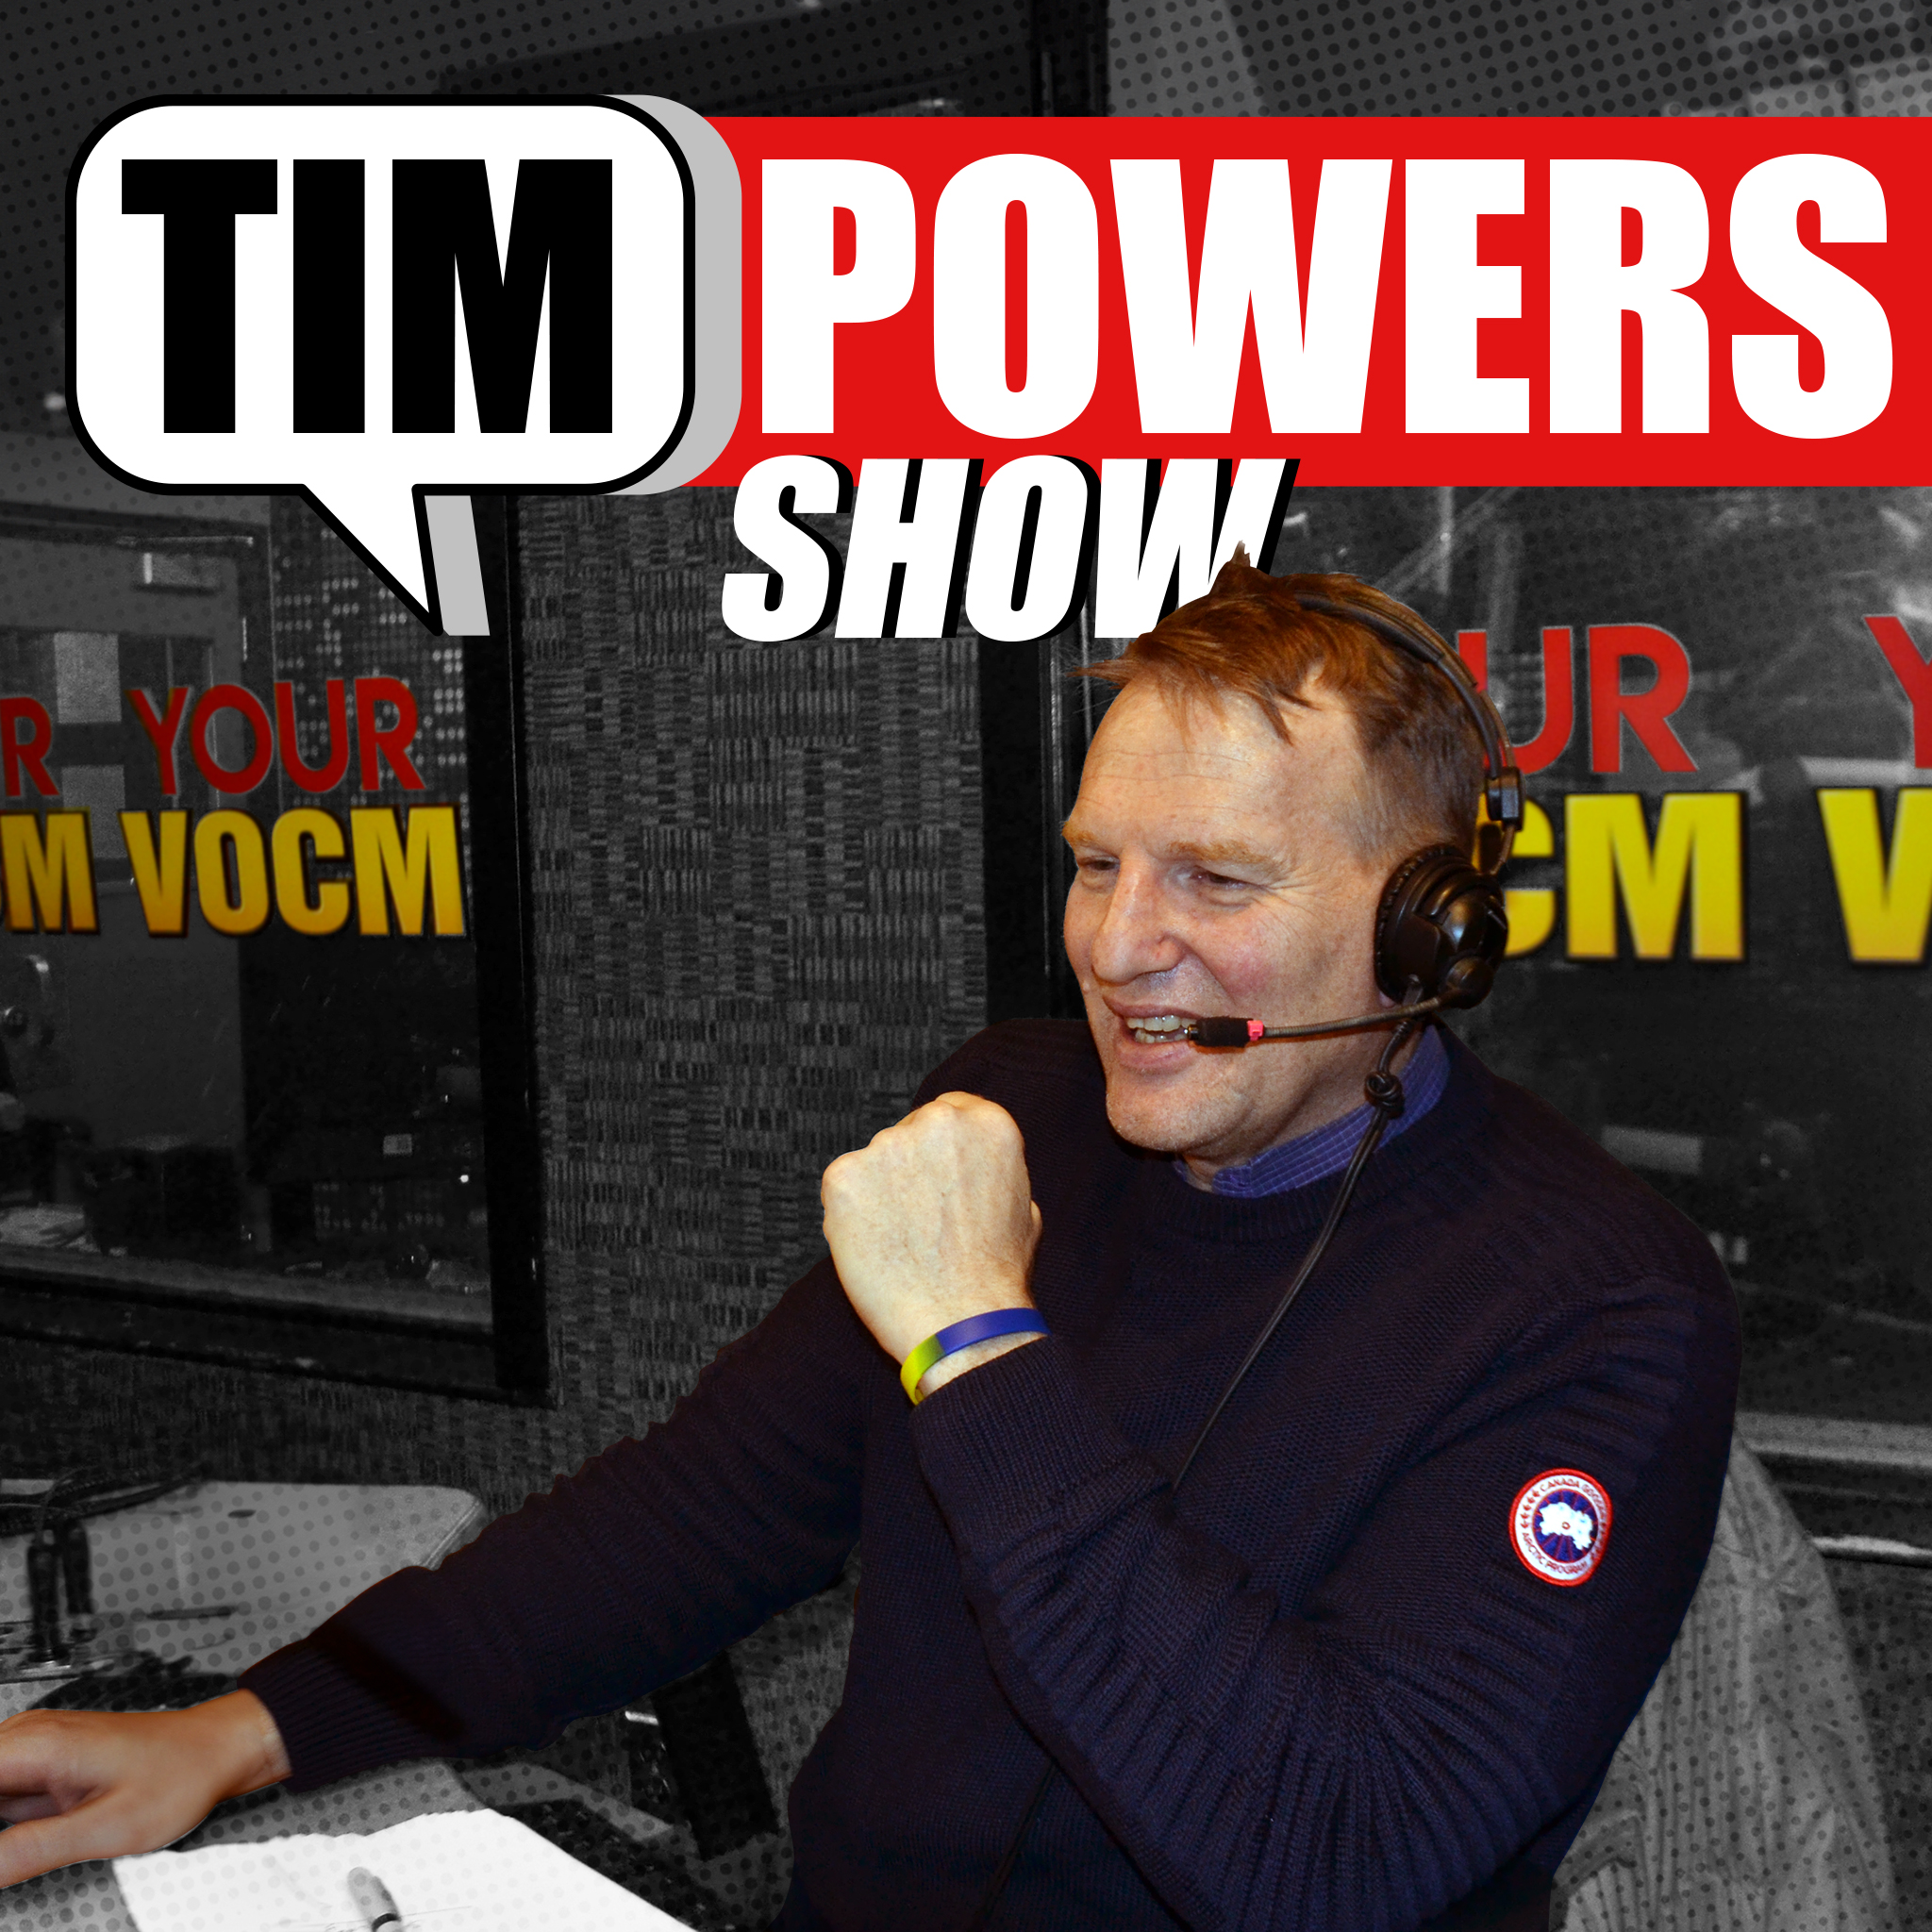 The Tim Powers Show, Thursday May 9th